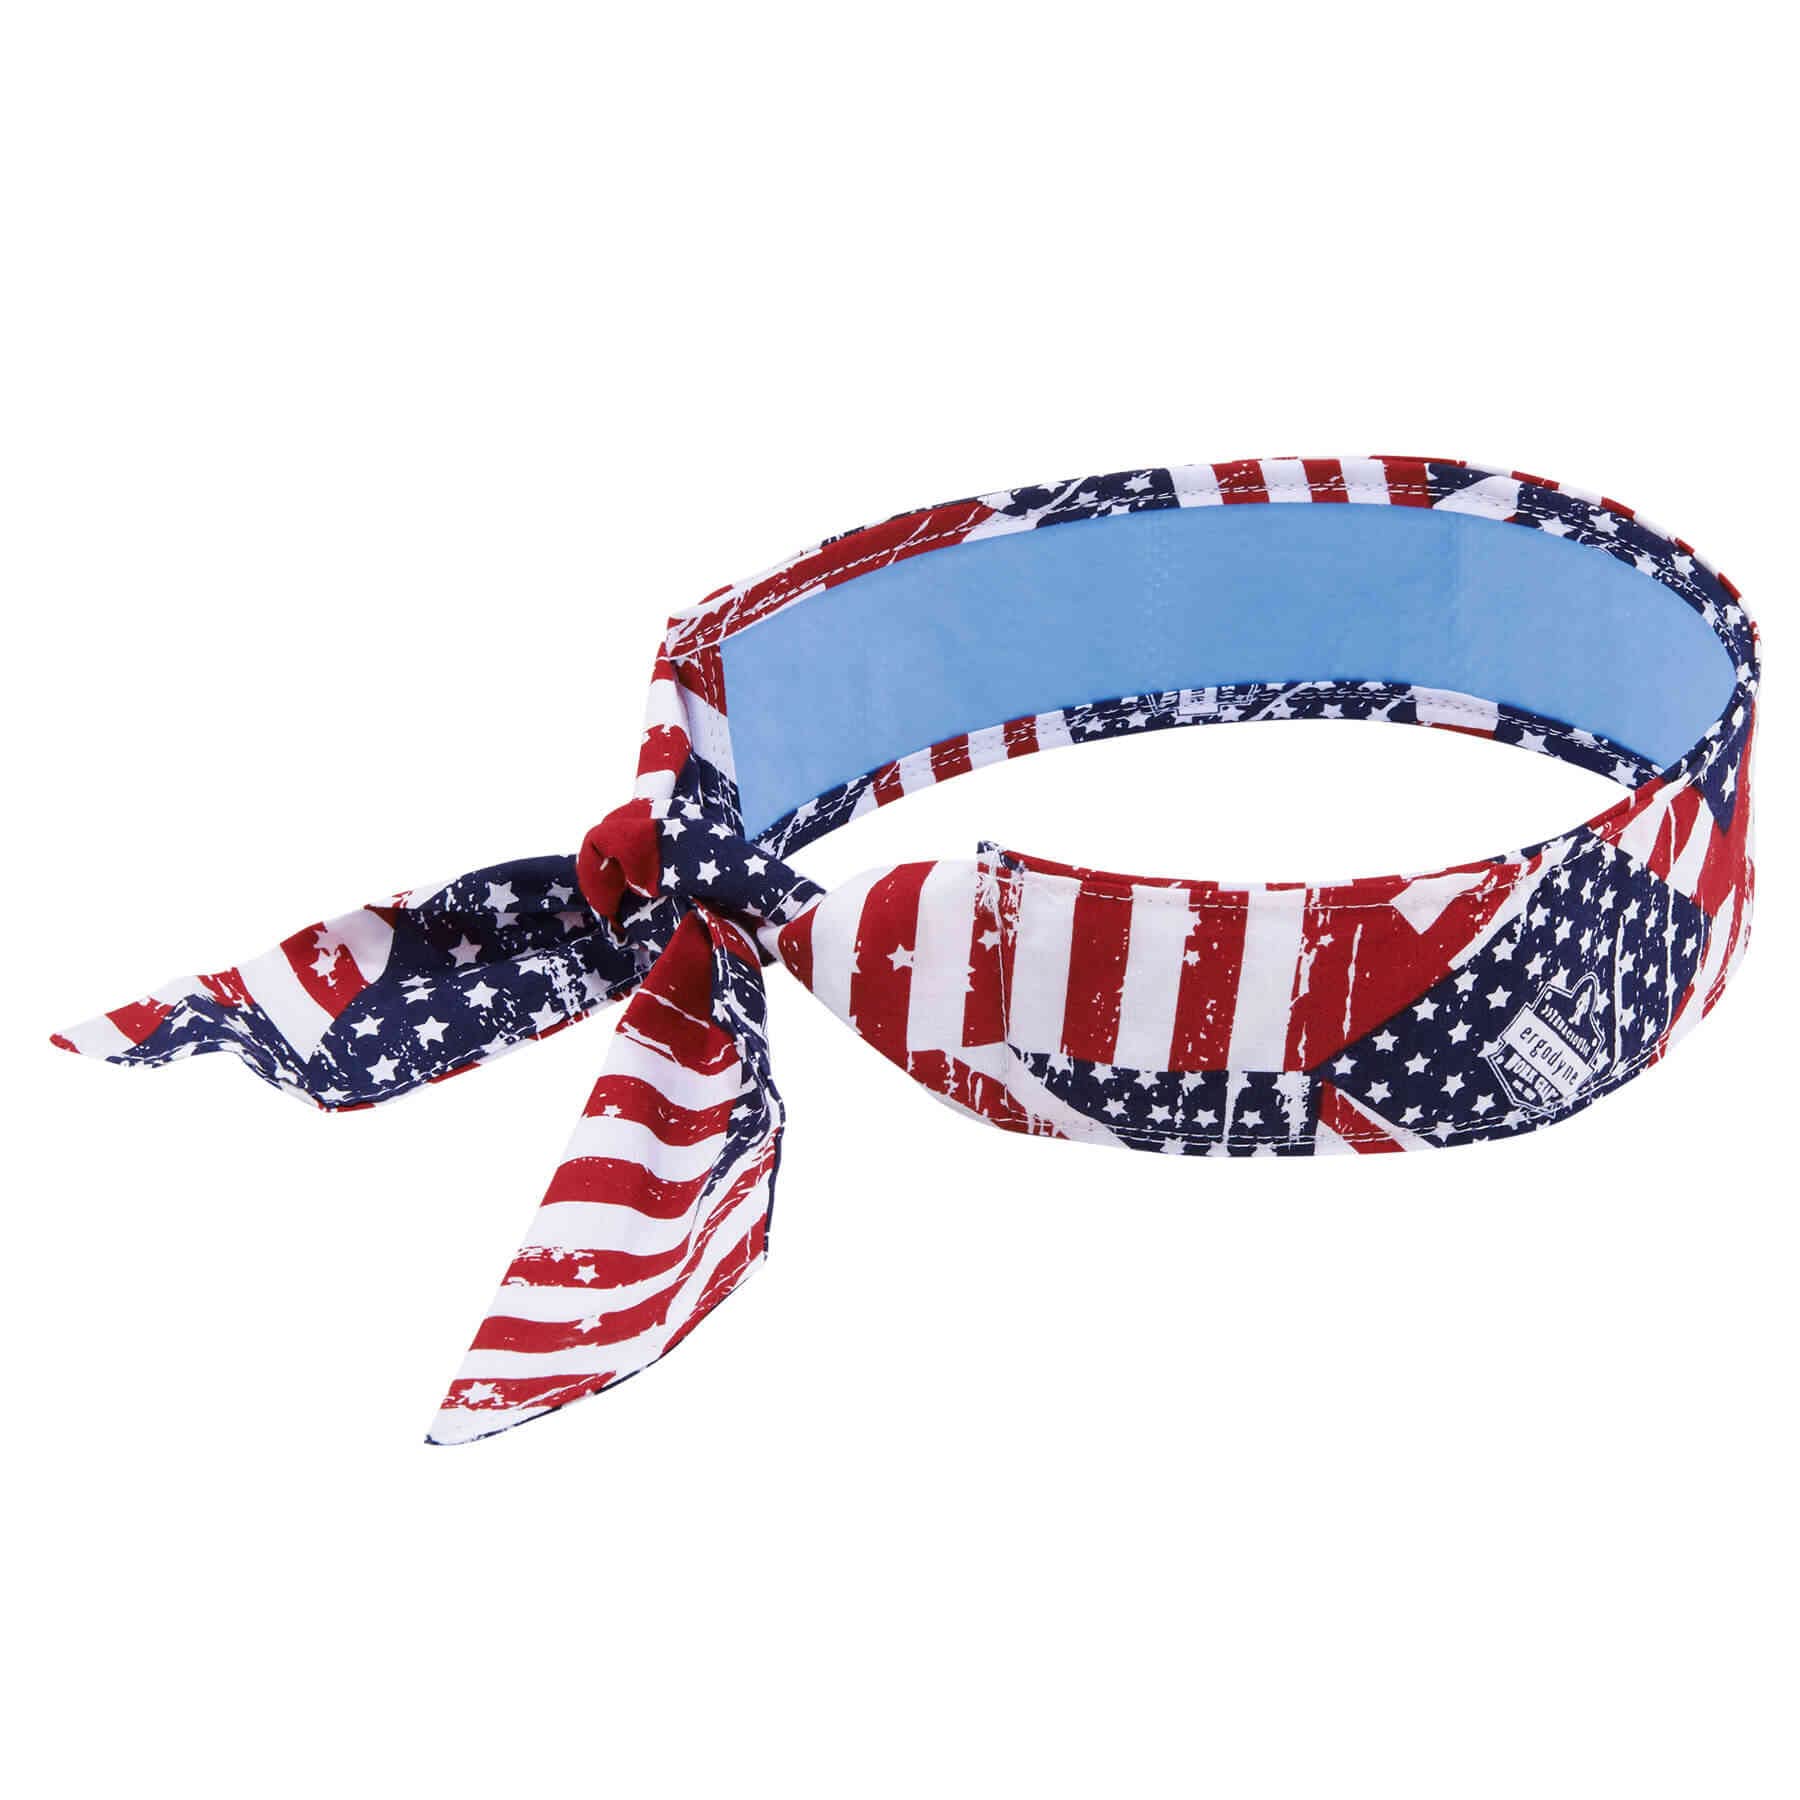 Ergodyne Chill Its 6700CT Cooling Bandana, Lined with Evaporative PVA Material for Fast Cooling Relief, Tie for Adjustable Fit, Stars & Stripes (12561)